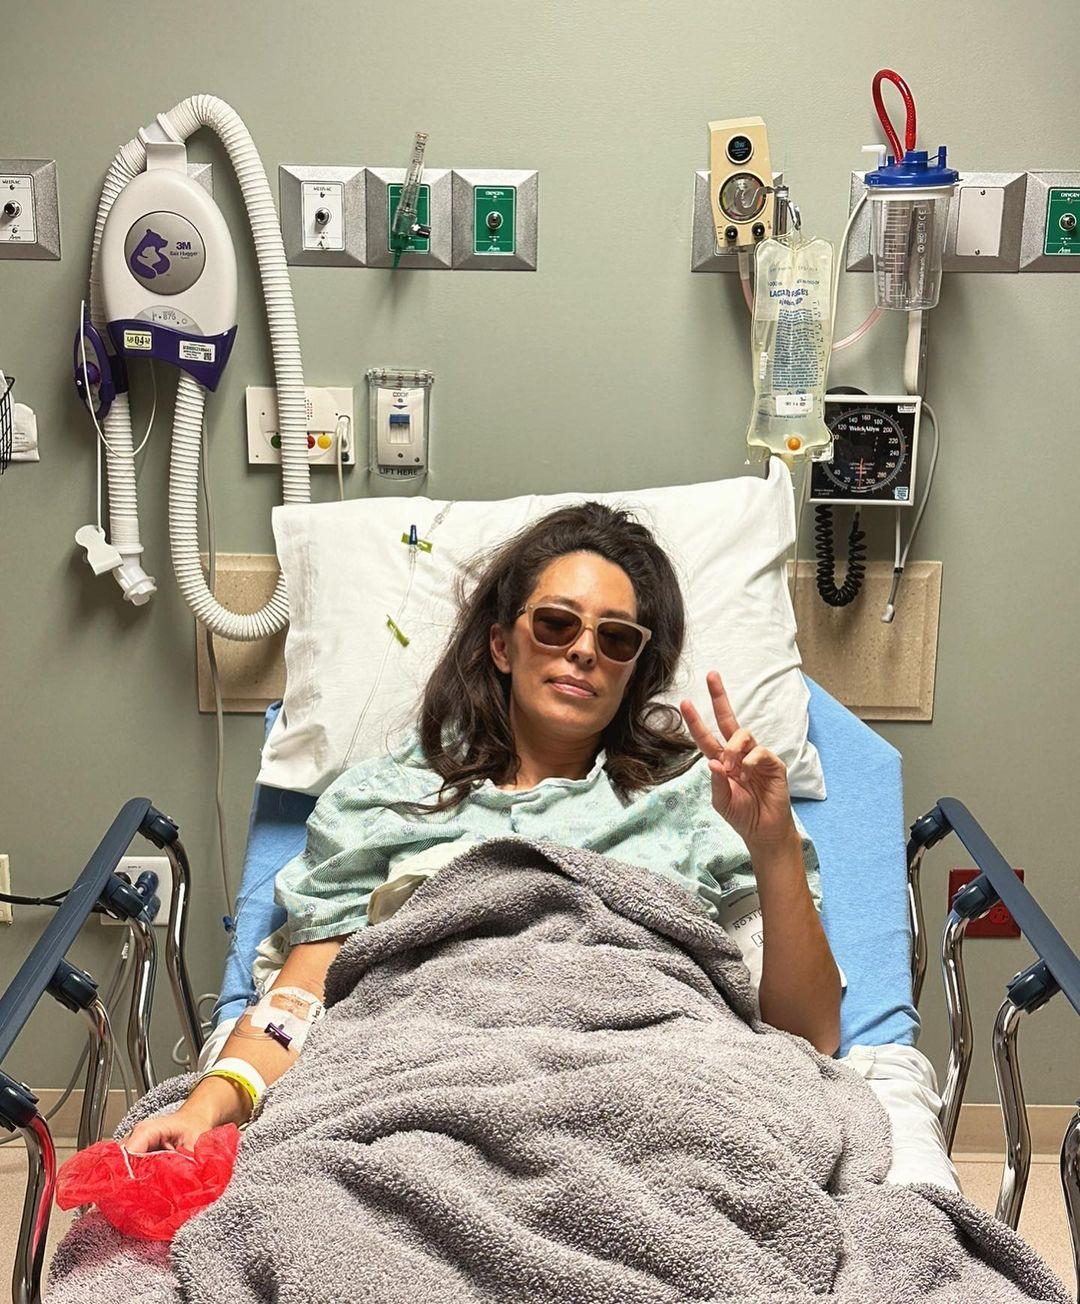 Joanna Gaines Goes Under The Knife Over Severe Back Injury